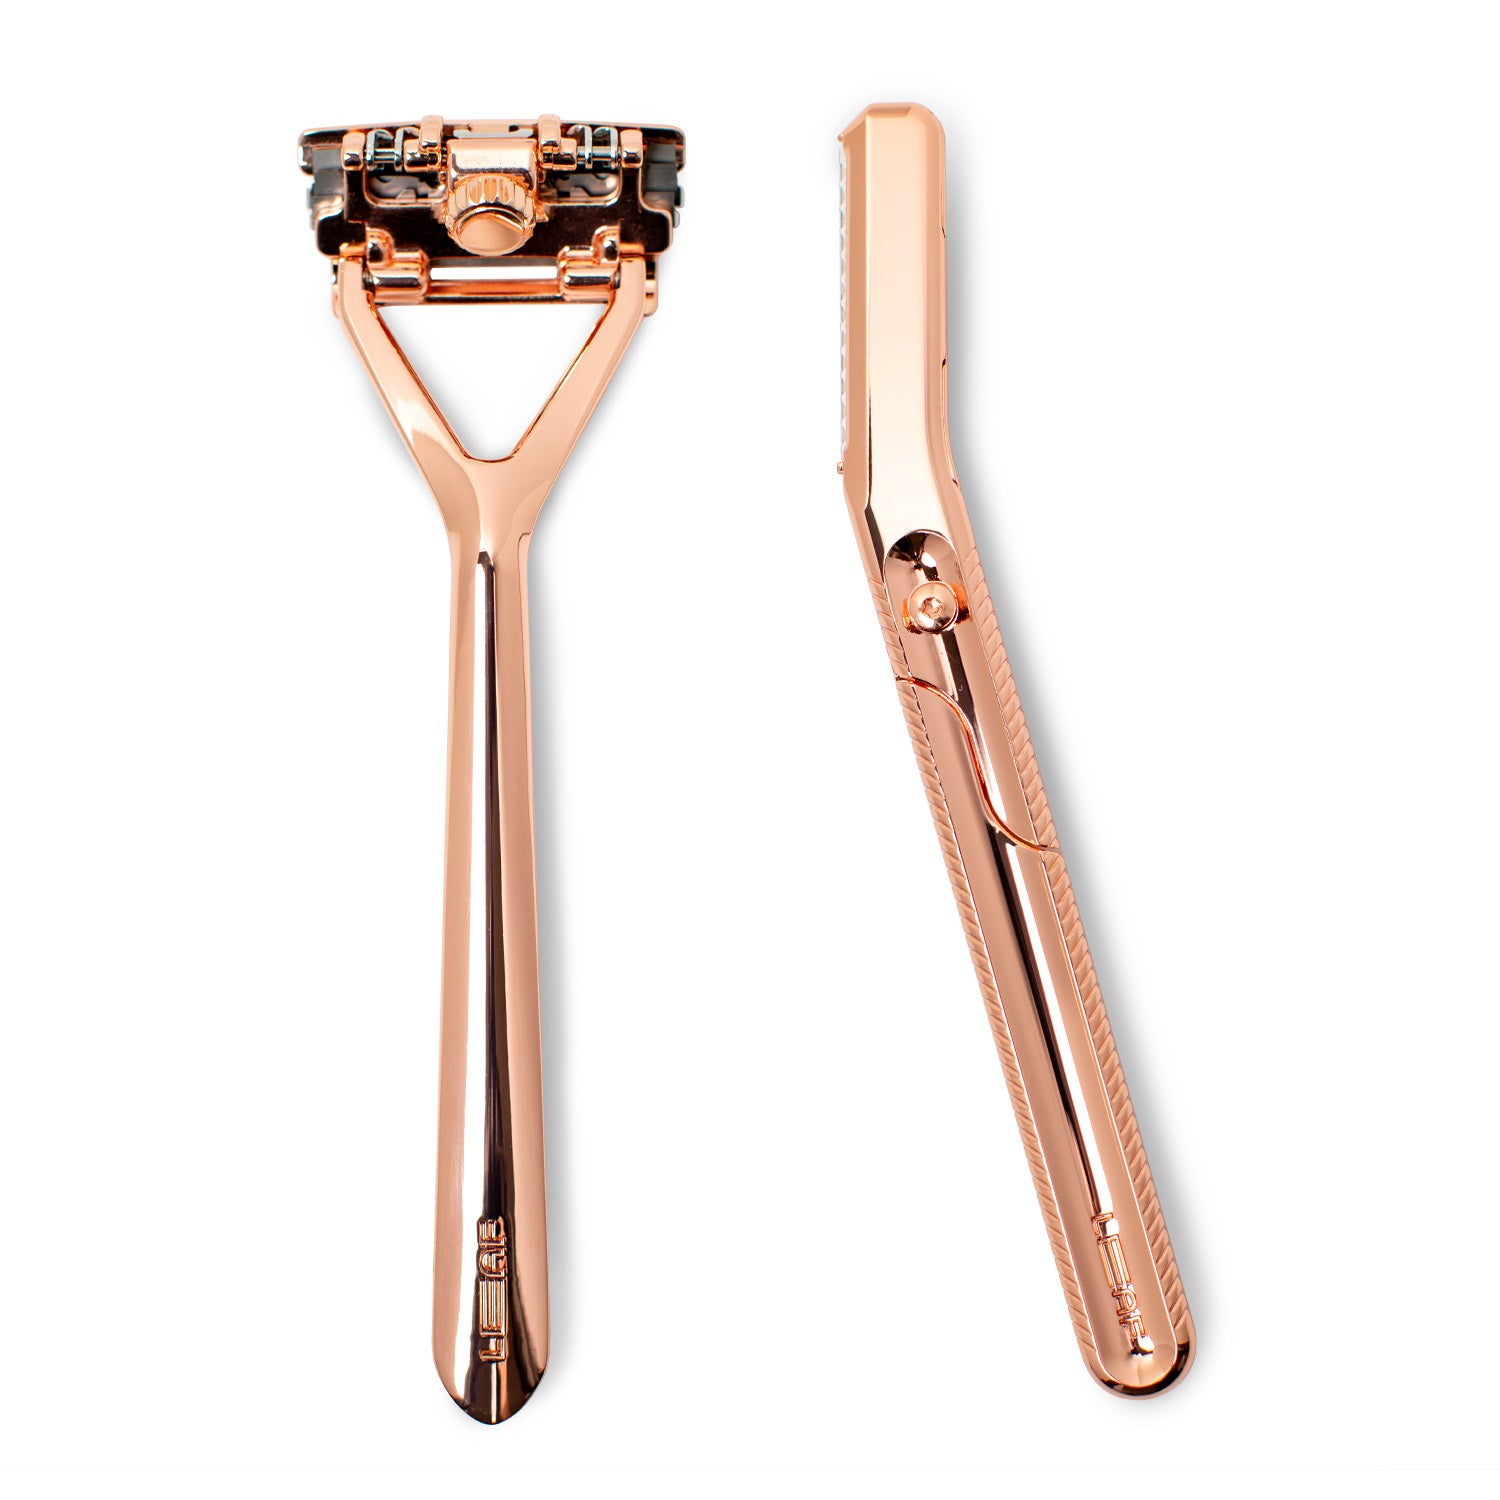 This image contains Leaf Shave brand Leaf and Dermaplaner razors on a white background, in the finish called Rose Gold